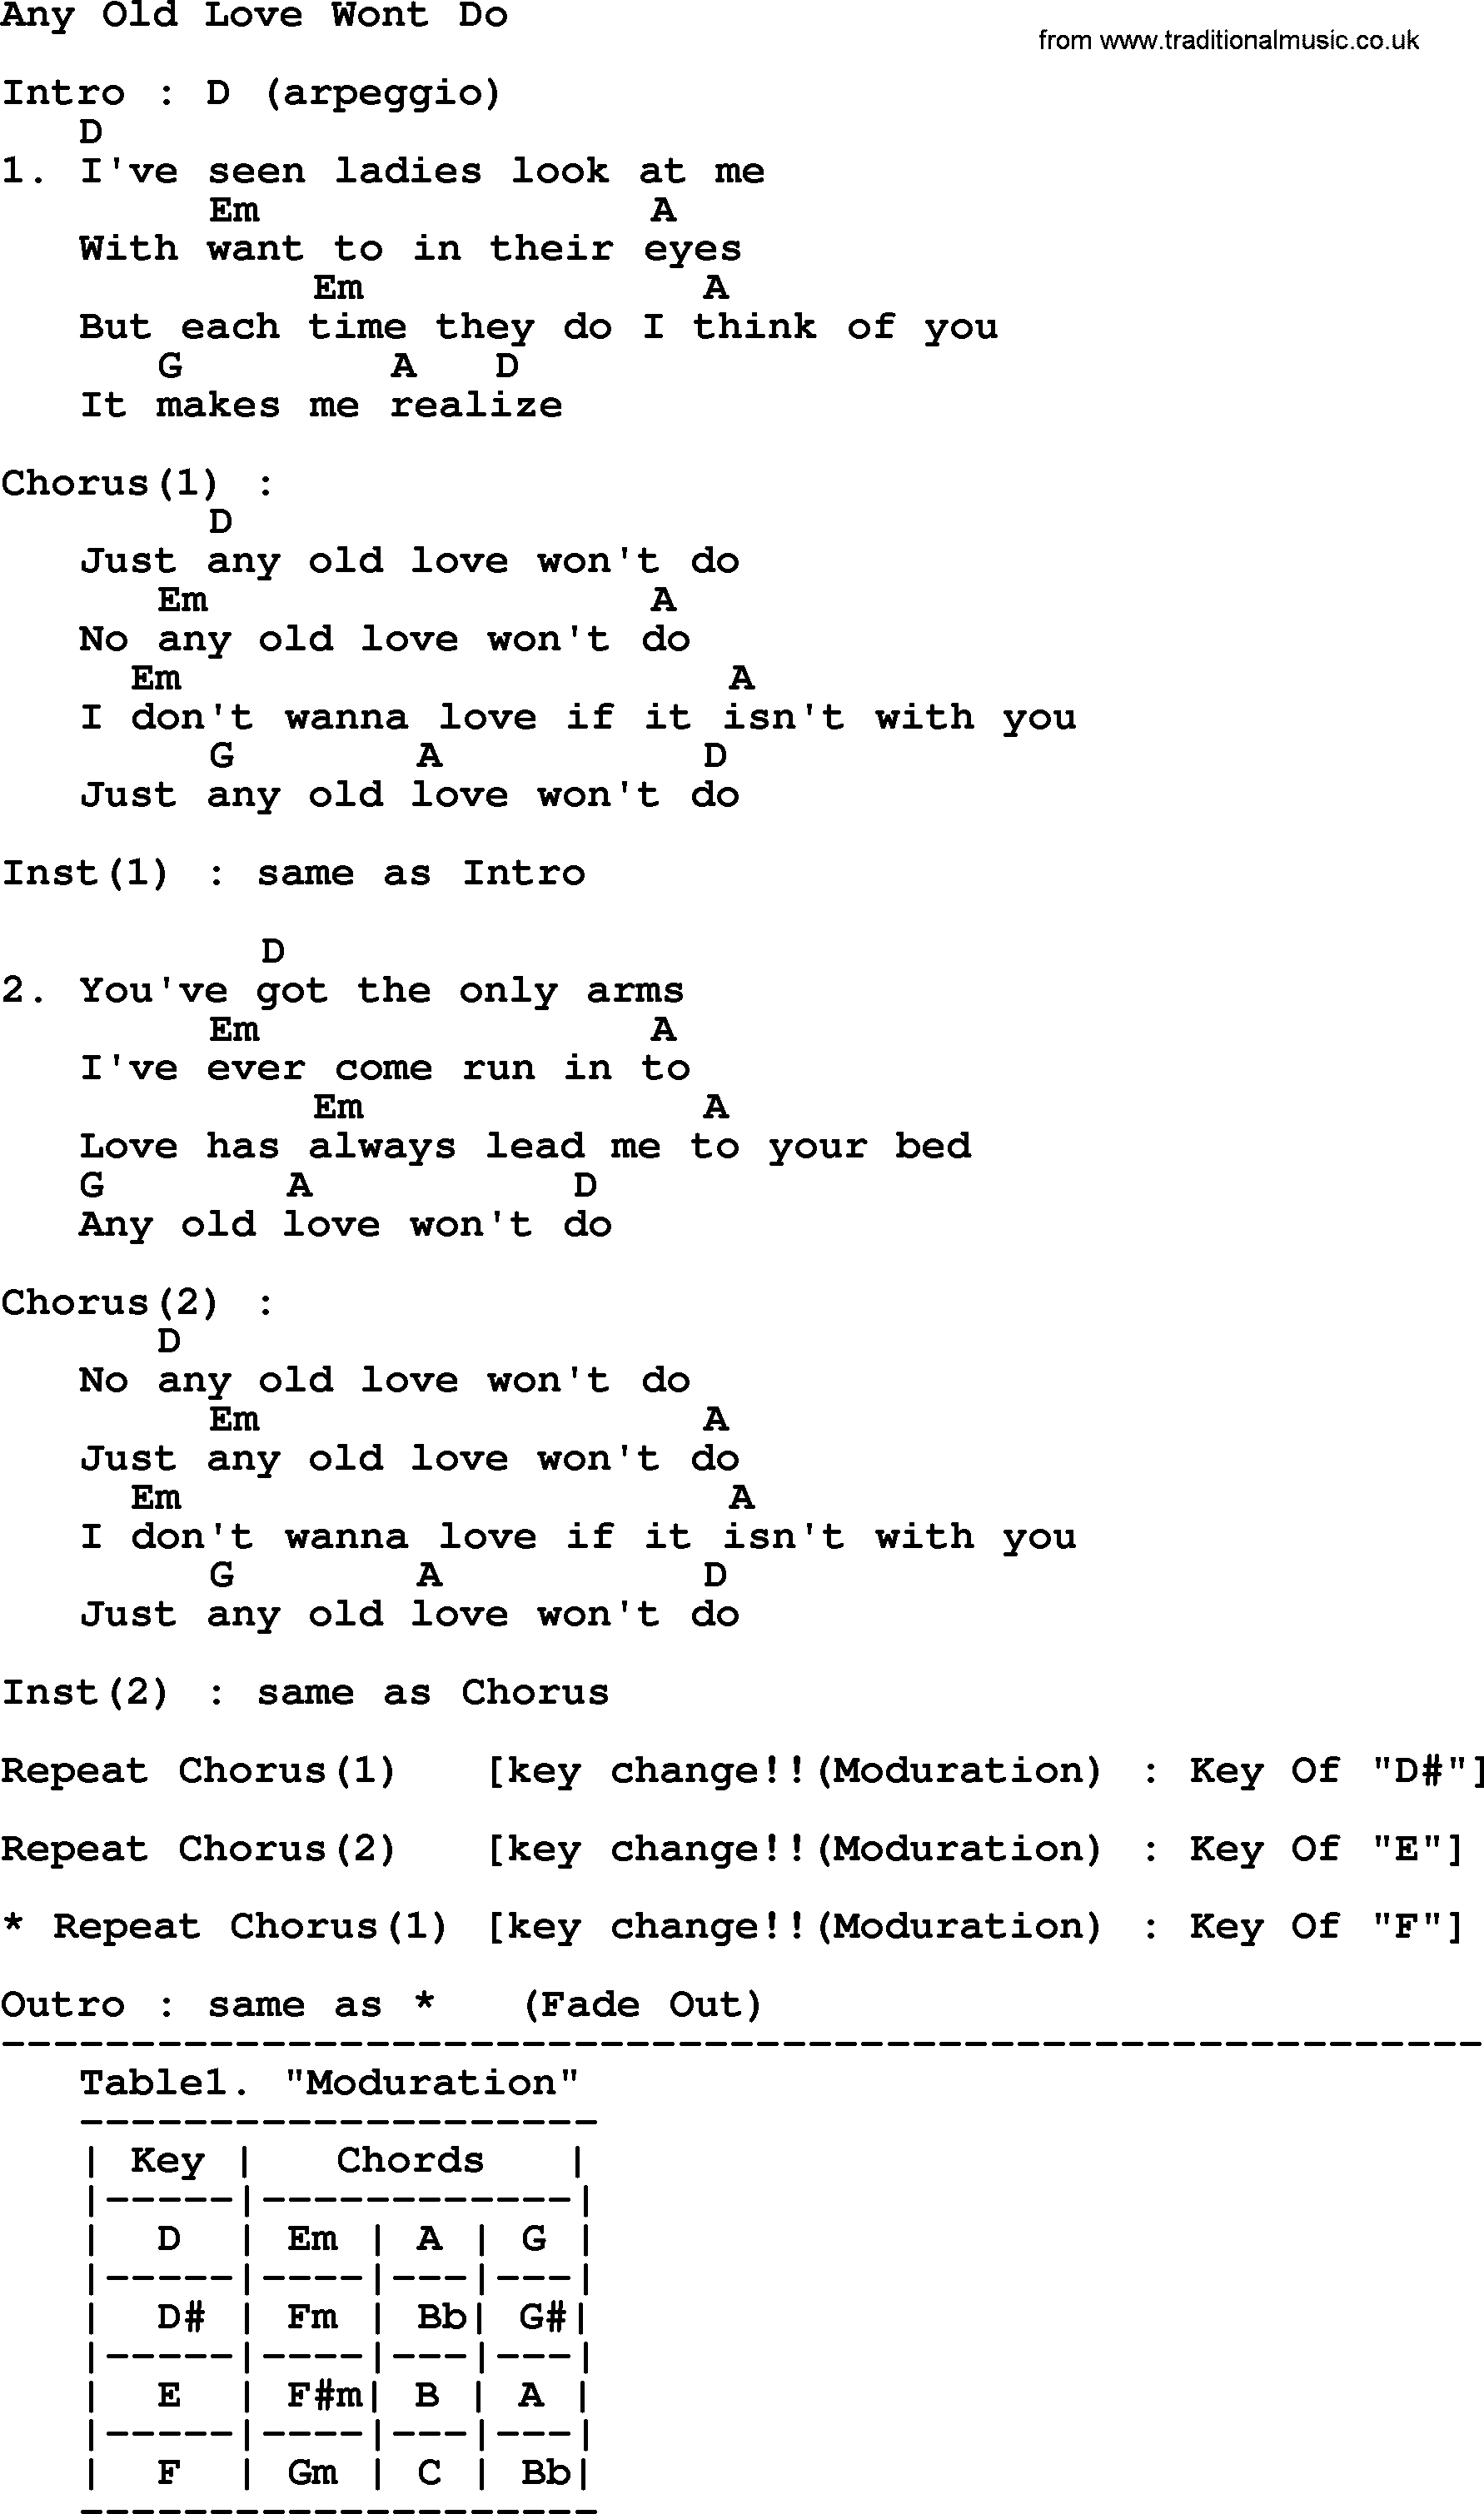 George Strait song: Any Old Love Wont Do, lyrics and chords